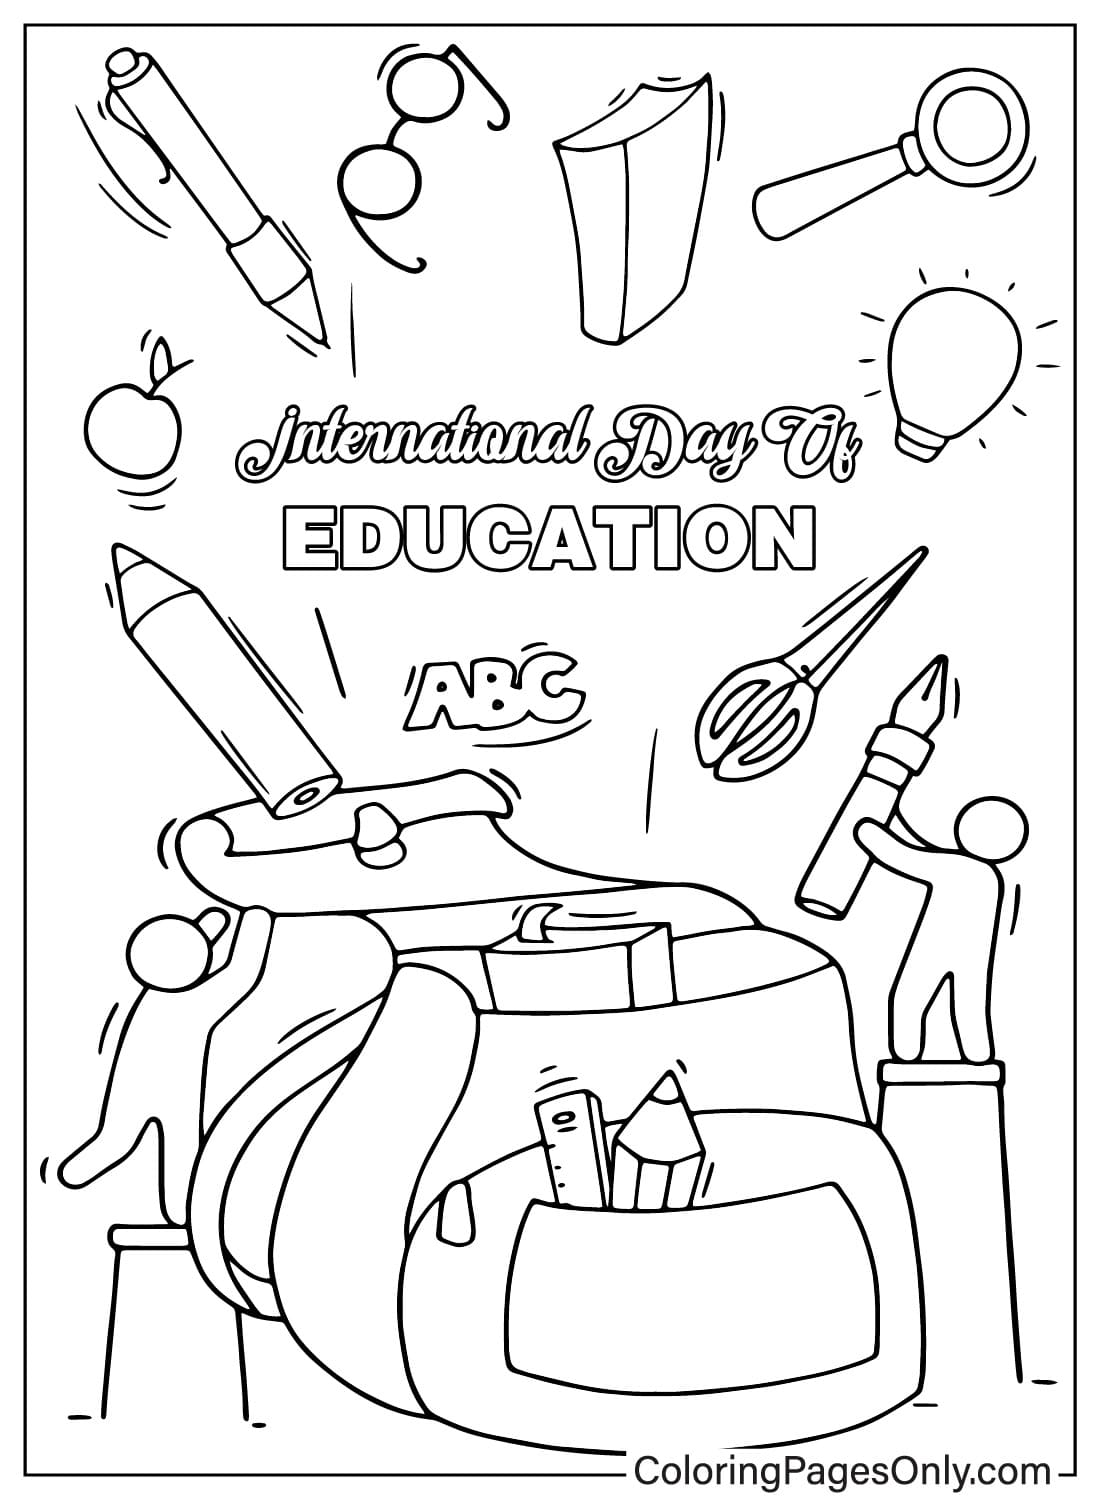 International Day of Education Coloring Page JPG from International Day of Education